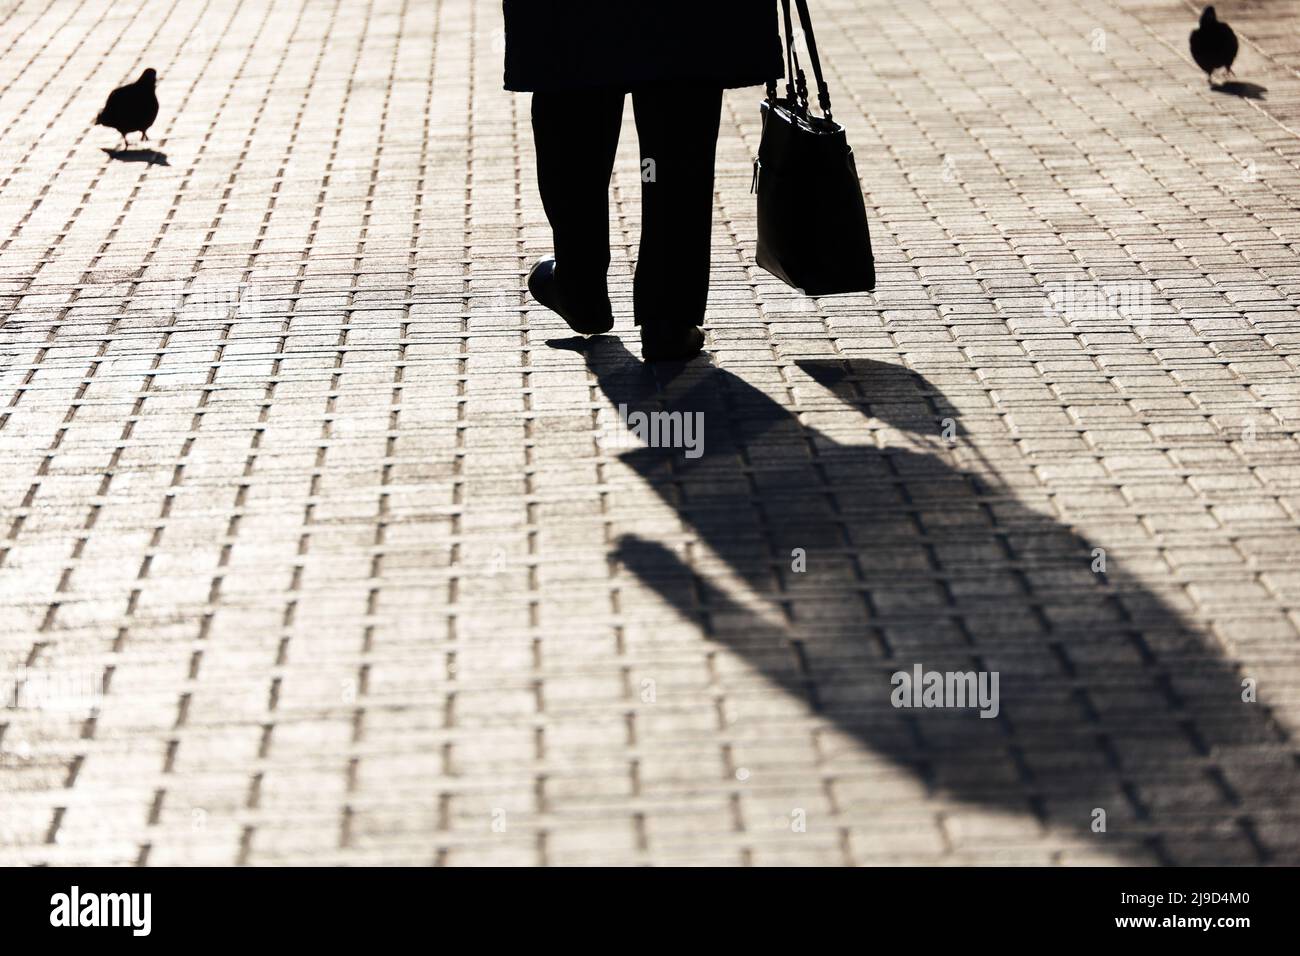 Silhouette of old woman with handbag walking down the street and pigeons, black shadow on pavement. Concept of retirement life, shopping Stock Photo